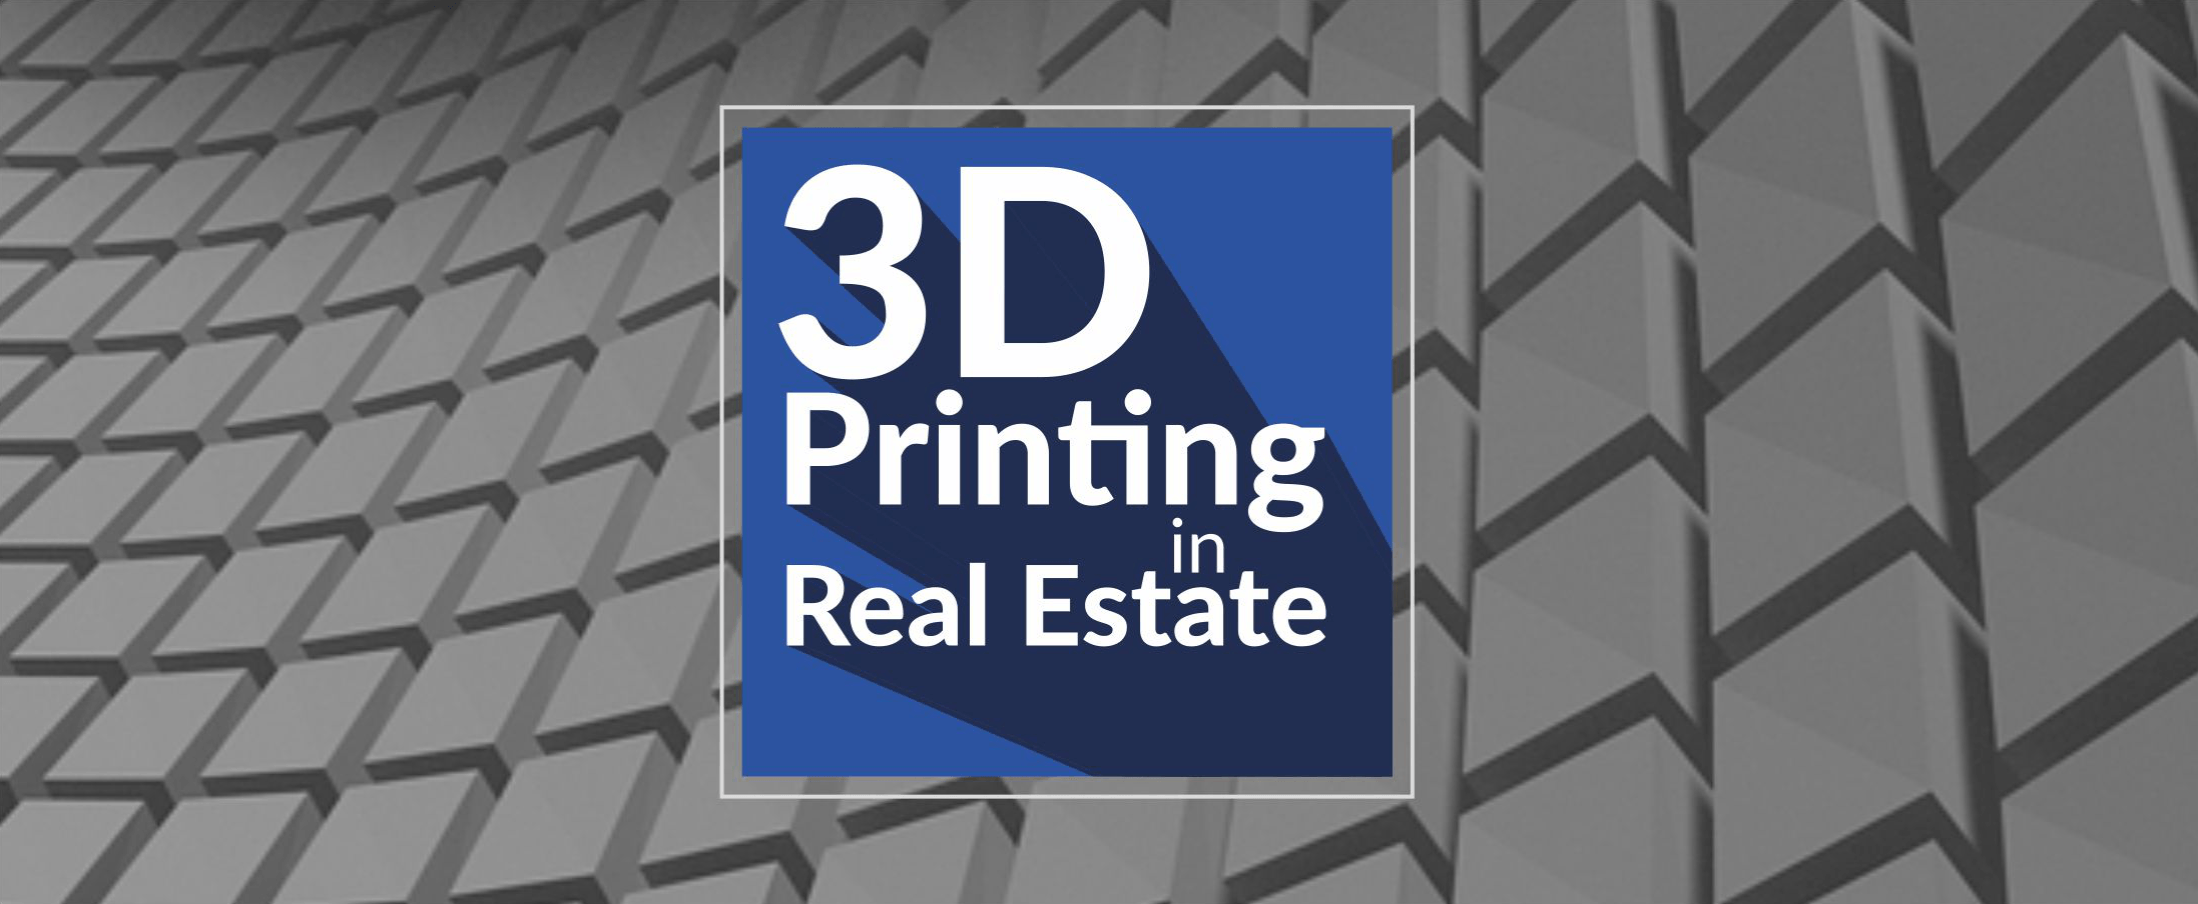 3DPrinting in Real Estate